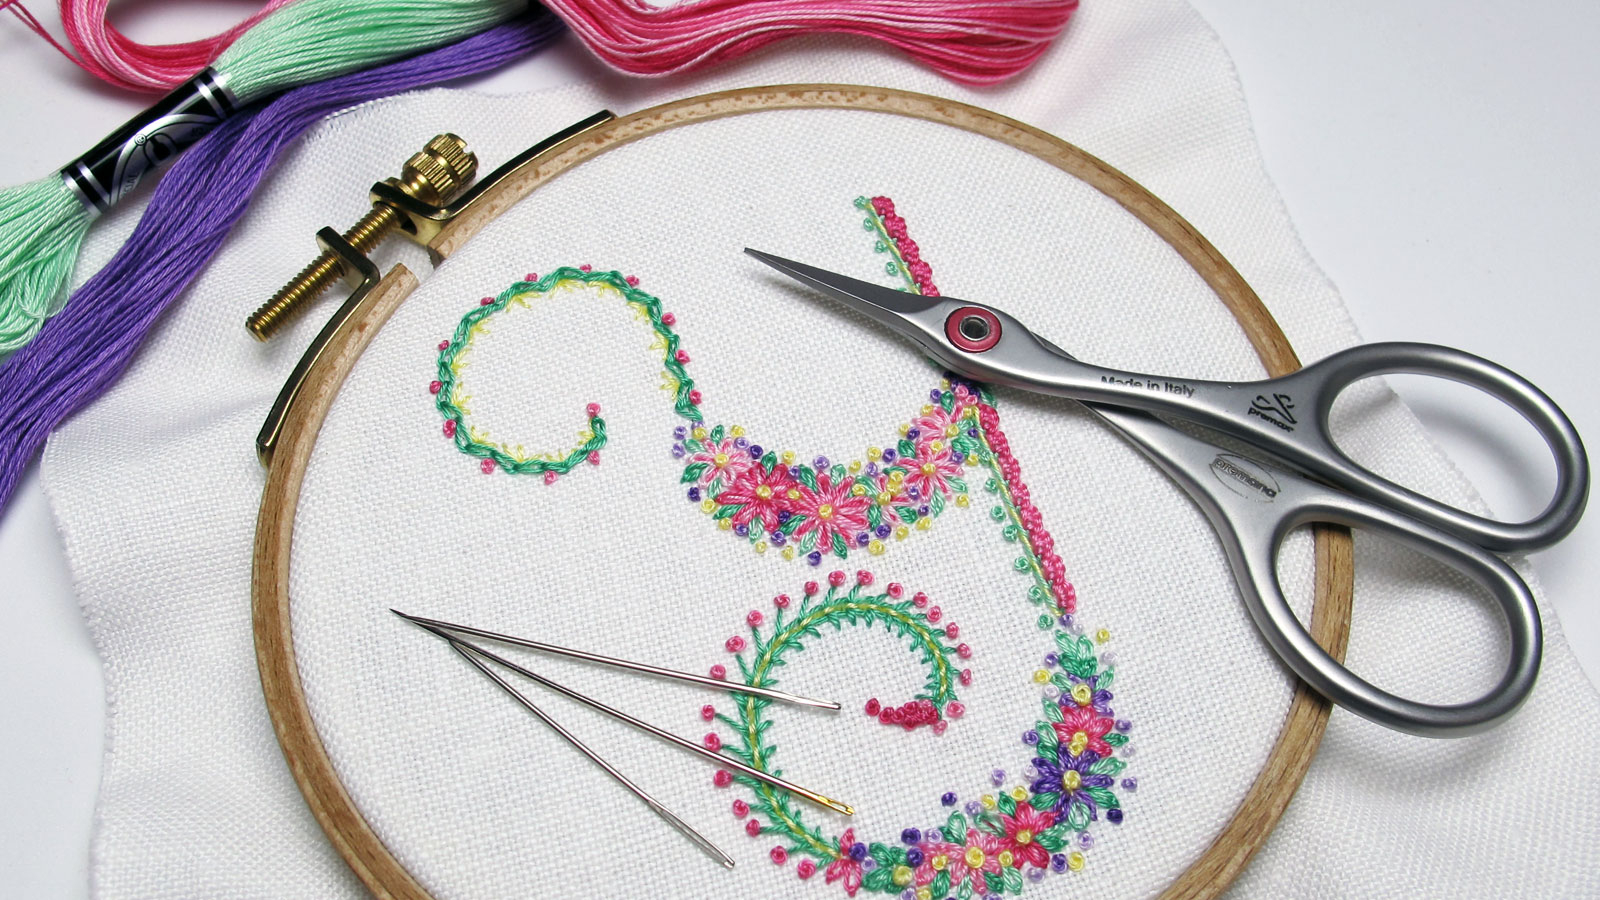 Hand Embroidery Pattern Books Needlenthread Tips Tricks And Great Resources For Hand Embroidery